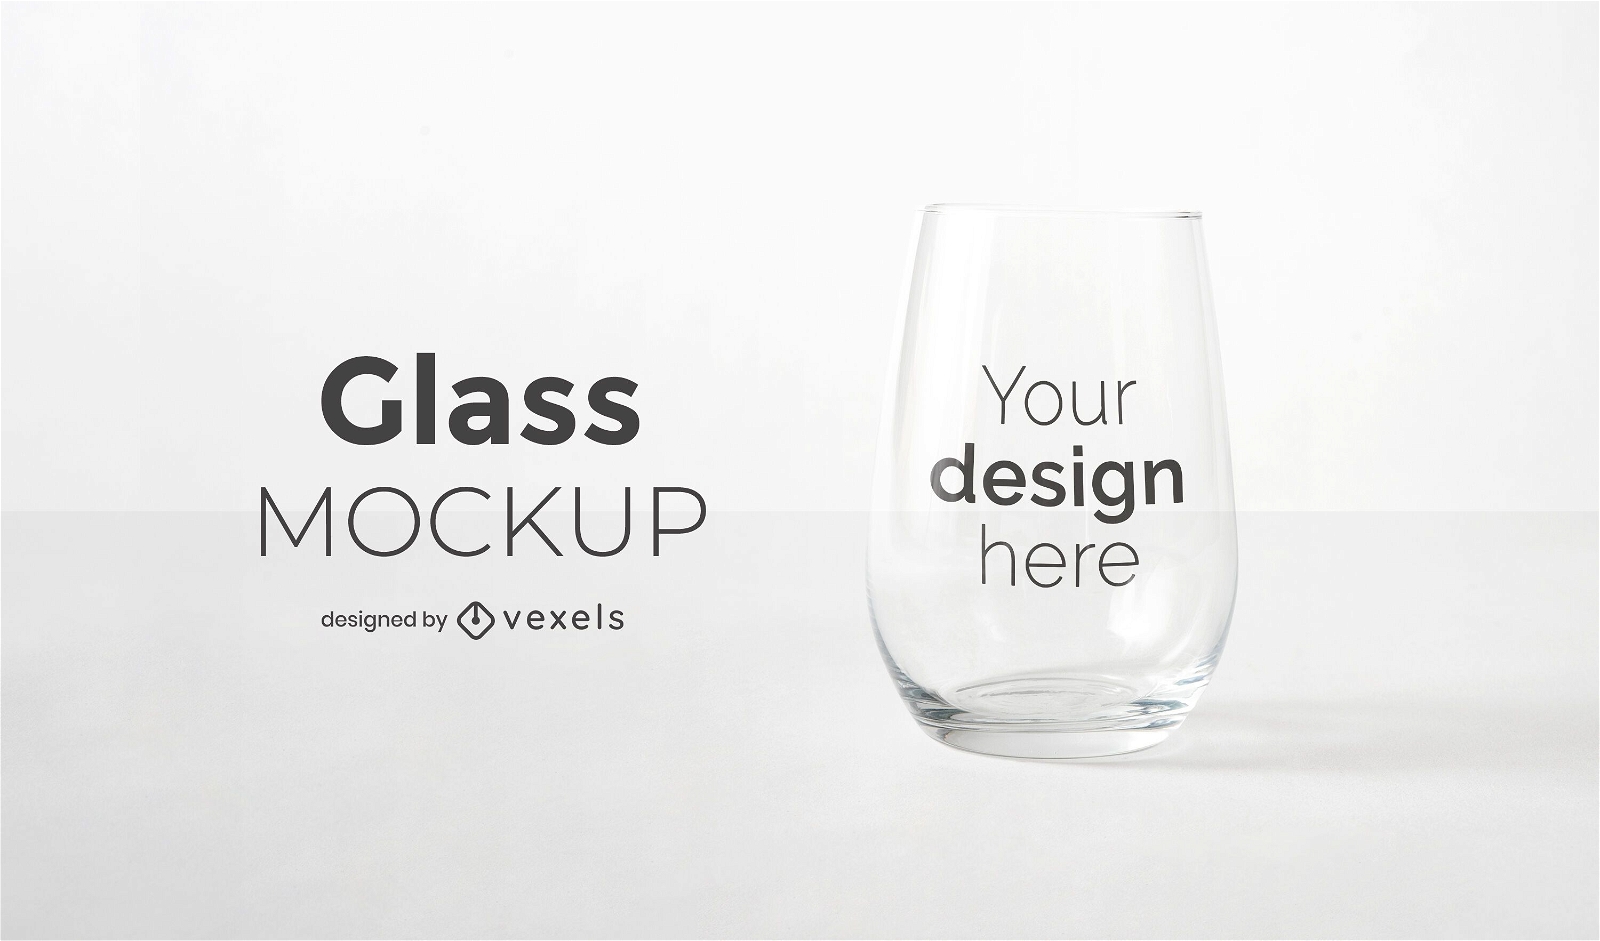 https://images.vexels.com/content/217772/preview/stemless-wine-glass-mockup-design-e02c02.png